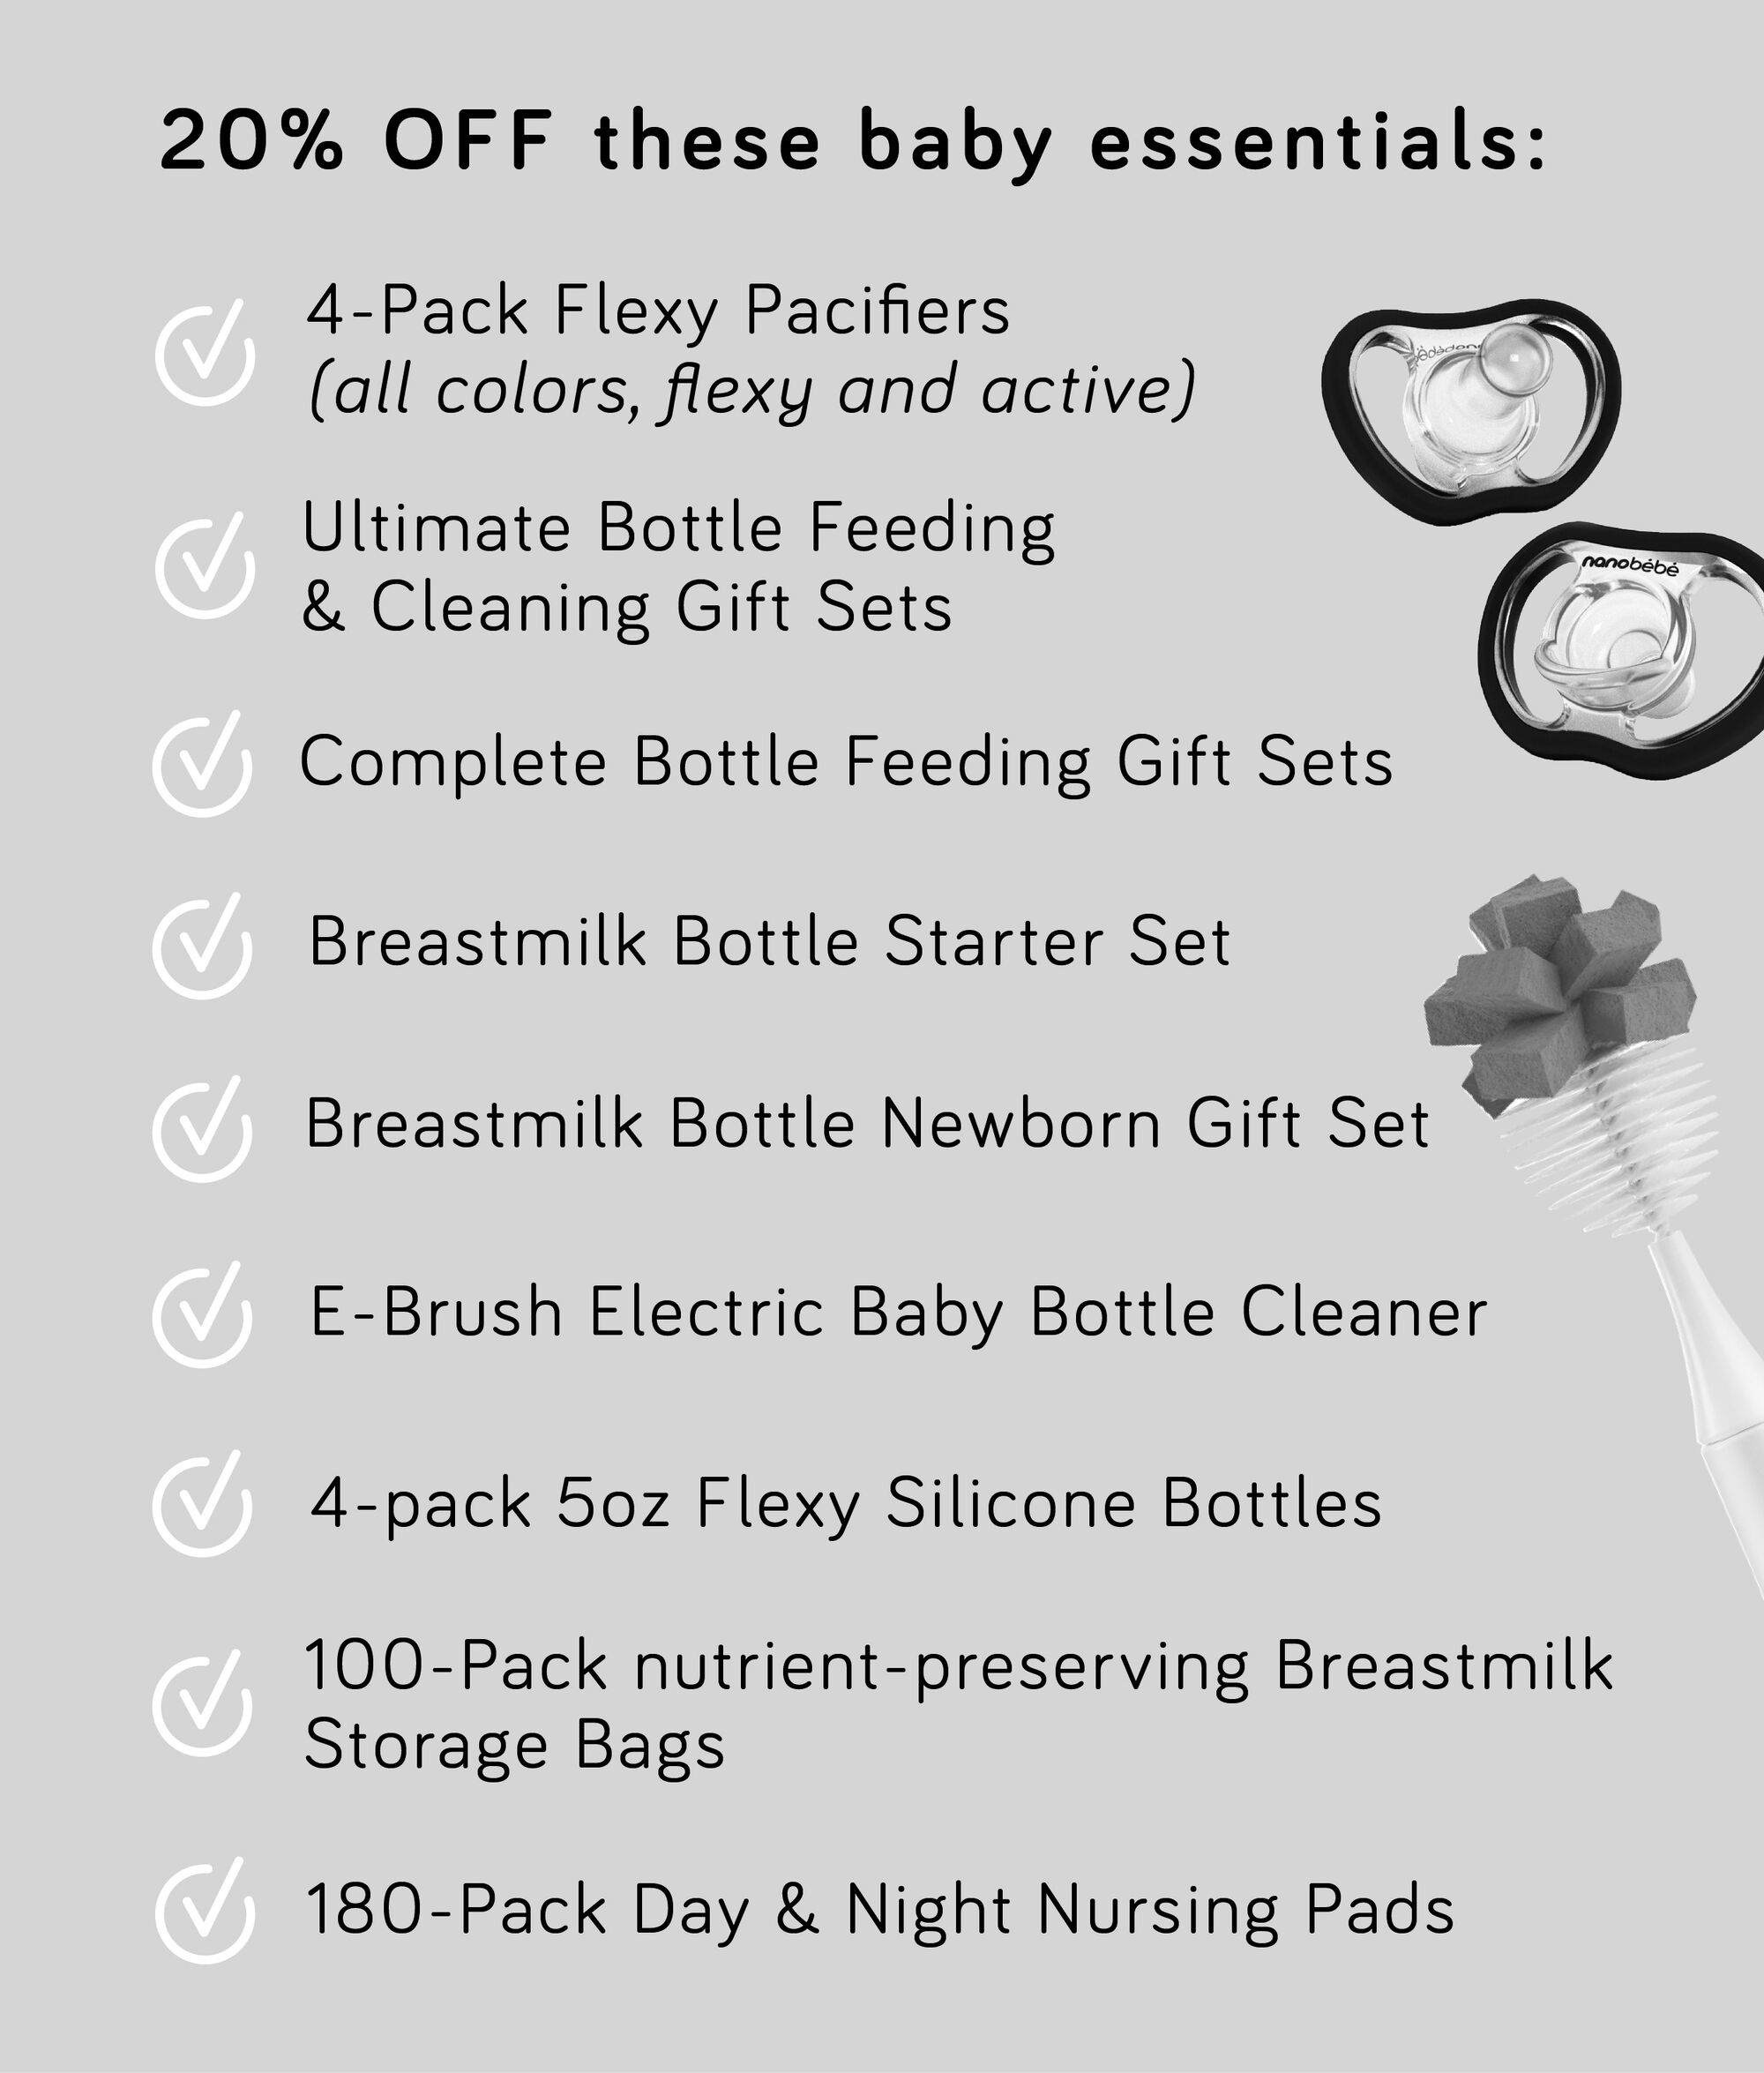 20% OFF these baby essentials: 4-Pack Flexy Pacifiers all colors, flexy and active Ultimate Bottle Feeding Cleaning Gift Sets Complete Bottle Feeding Gift Sets Breastmilk Bottle Starter Set Breastmilk Bottle Newborn Gift Set E-Brush Electric Baby Bottle Cleaner 4-pack 50z Flexy Silicone Bottles 100-Pack nutrient-preserving Breastmilk Storage Bags 180-Pack Day Night Nursing Pads 